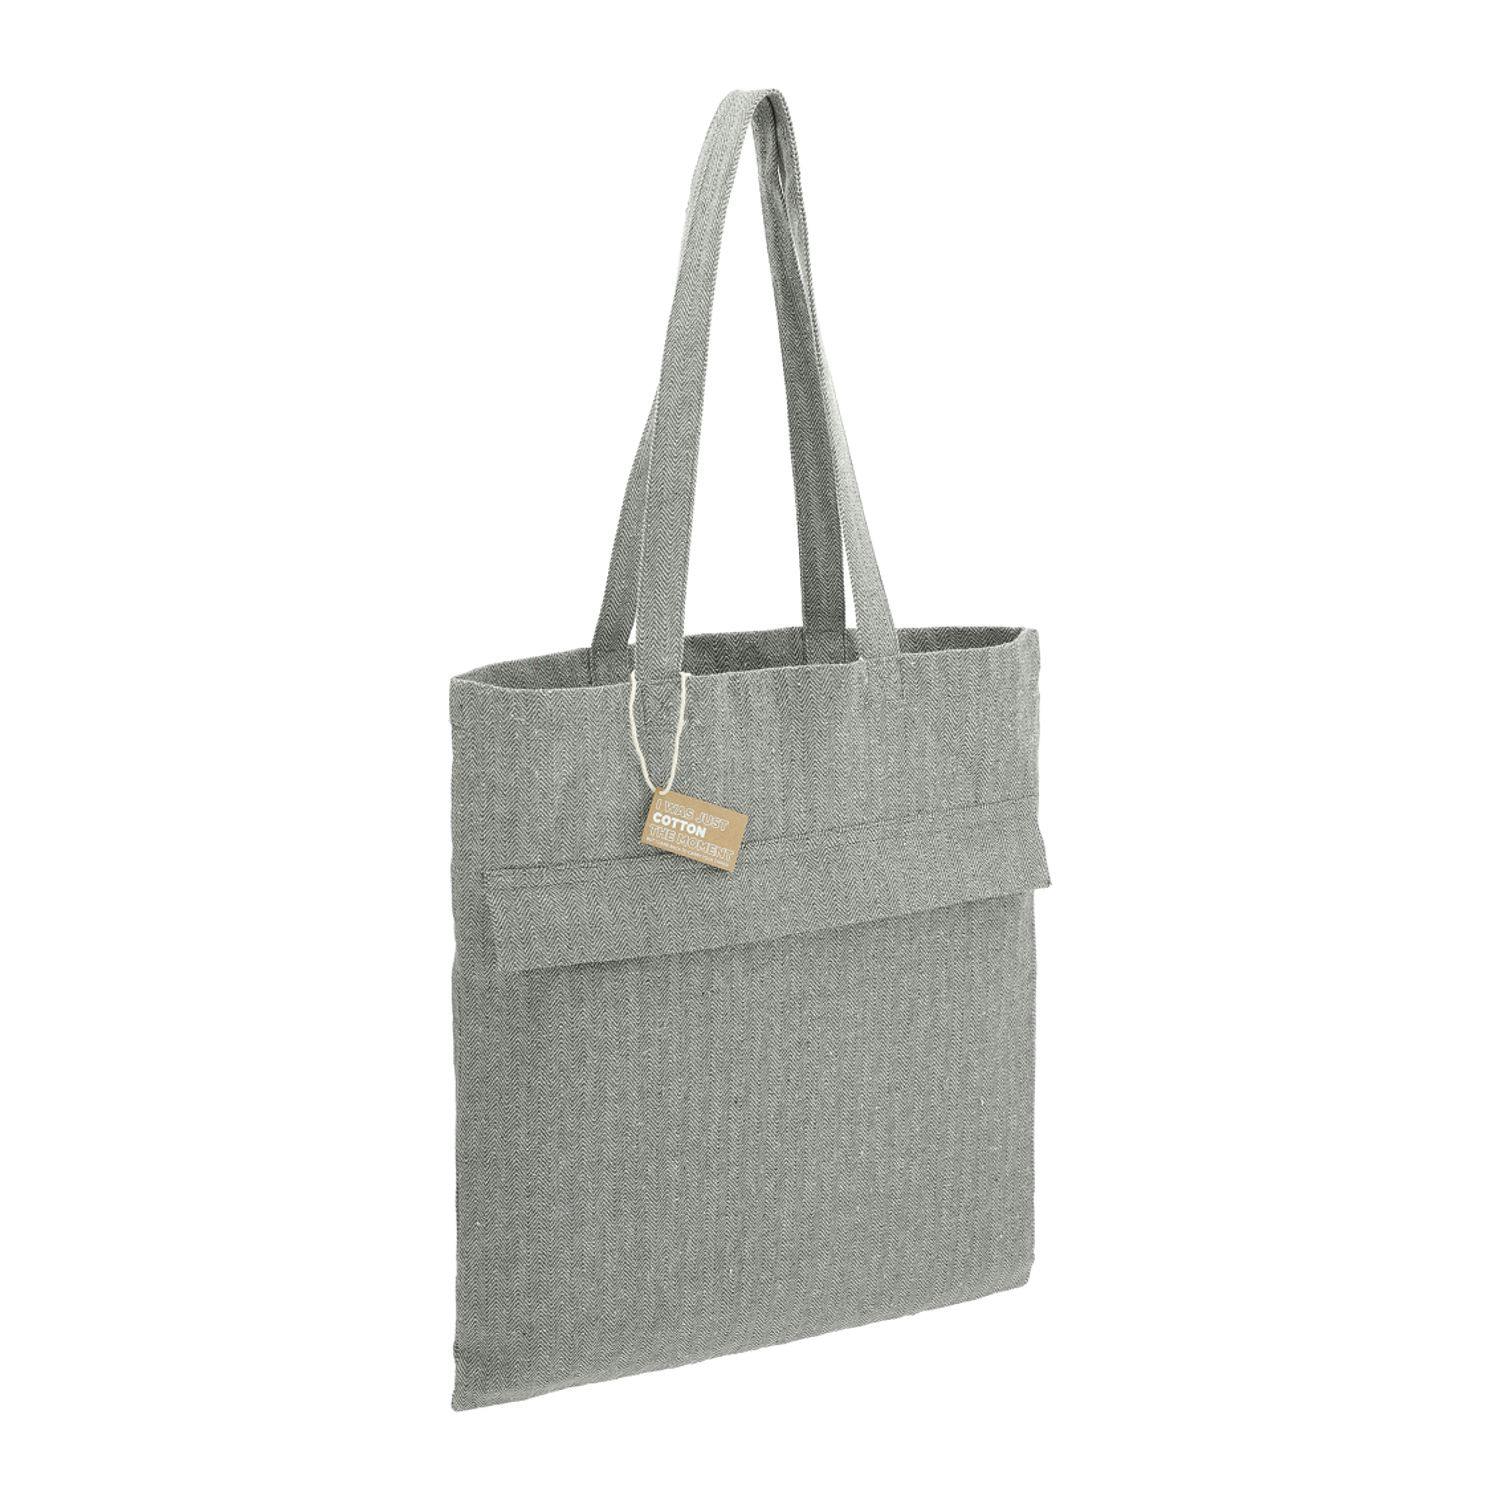 Recycled Cotton Herringbone Tote w/Zip Pocket - additional Image 3